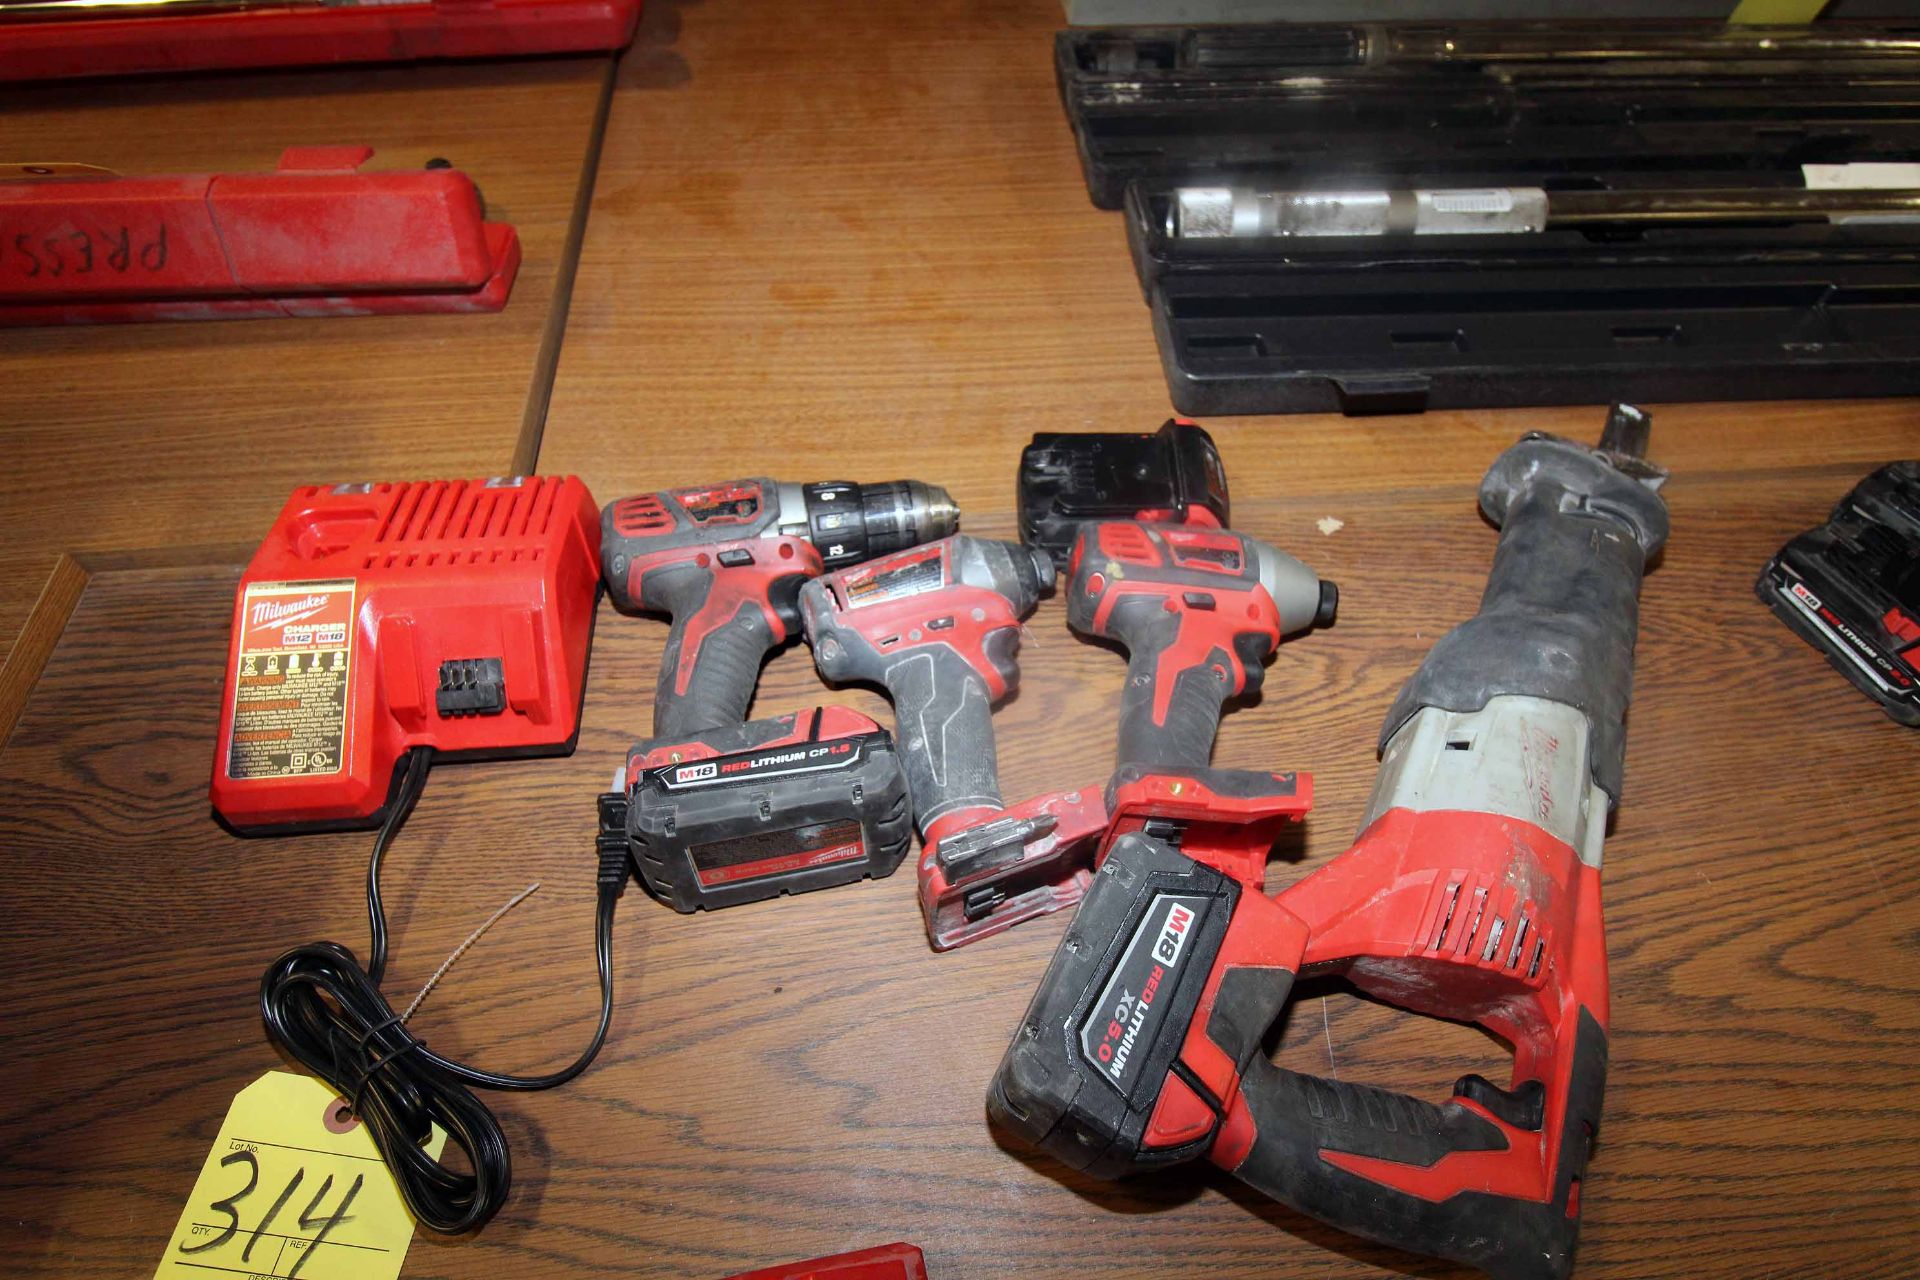 LOT OF MILWAUKEE CORDLESS TOOLING: (2) impacts, (1) right angle drill, (1) reciprocating saw, (3)